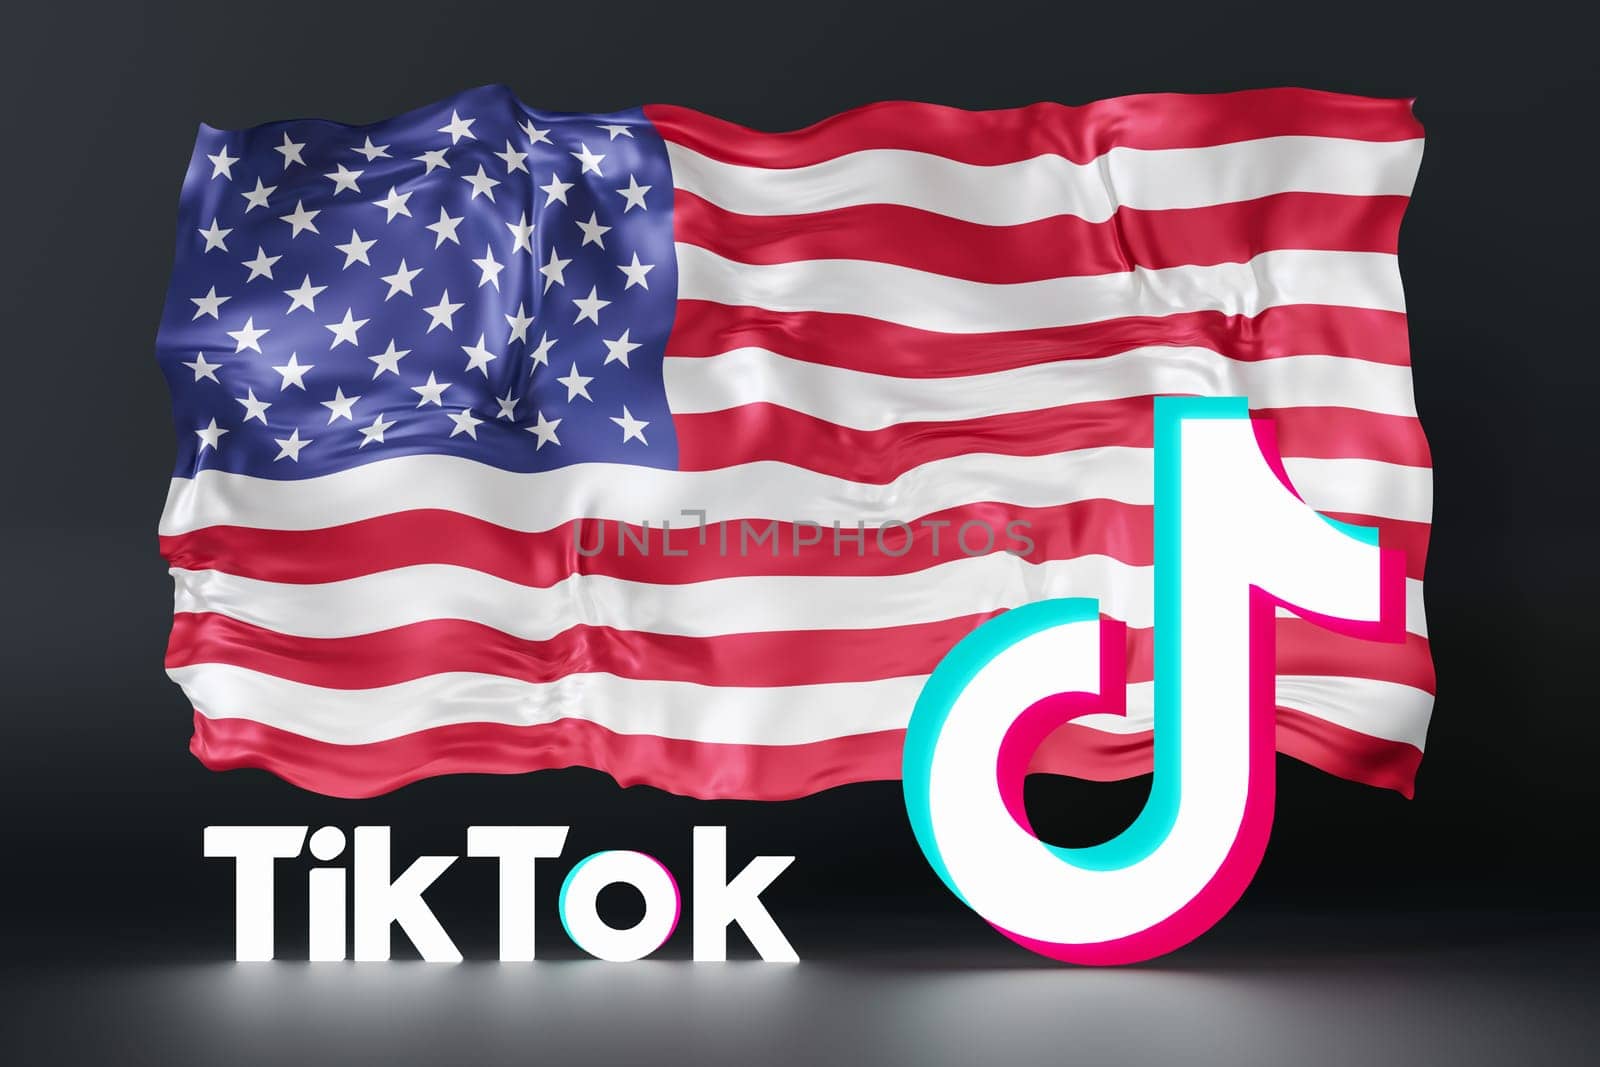 Leipzig, Germany - 15-05-2024: vibrant 3D rendering of the Tik Tok logo and American flag, symbolizing the platforms influence and presence in the USA. Tiktok ban. 3D